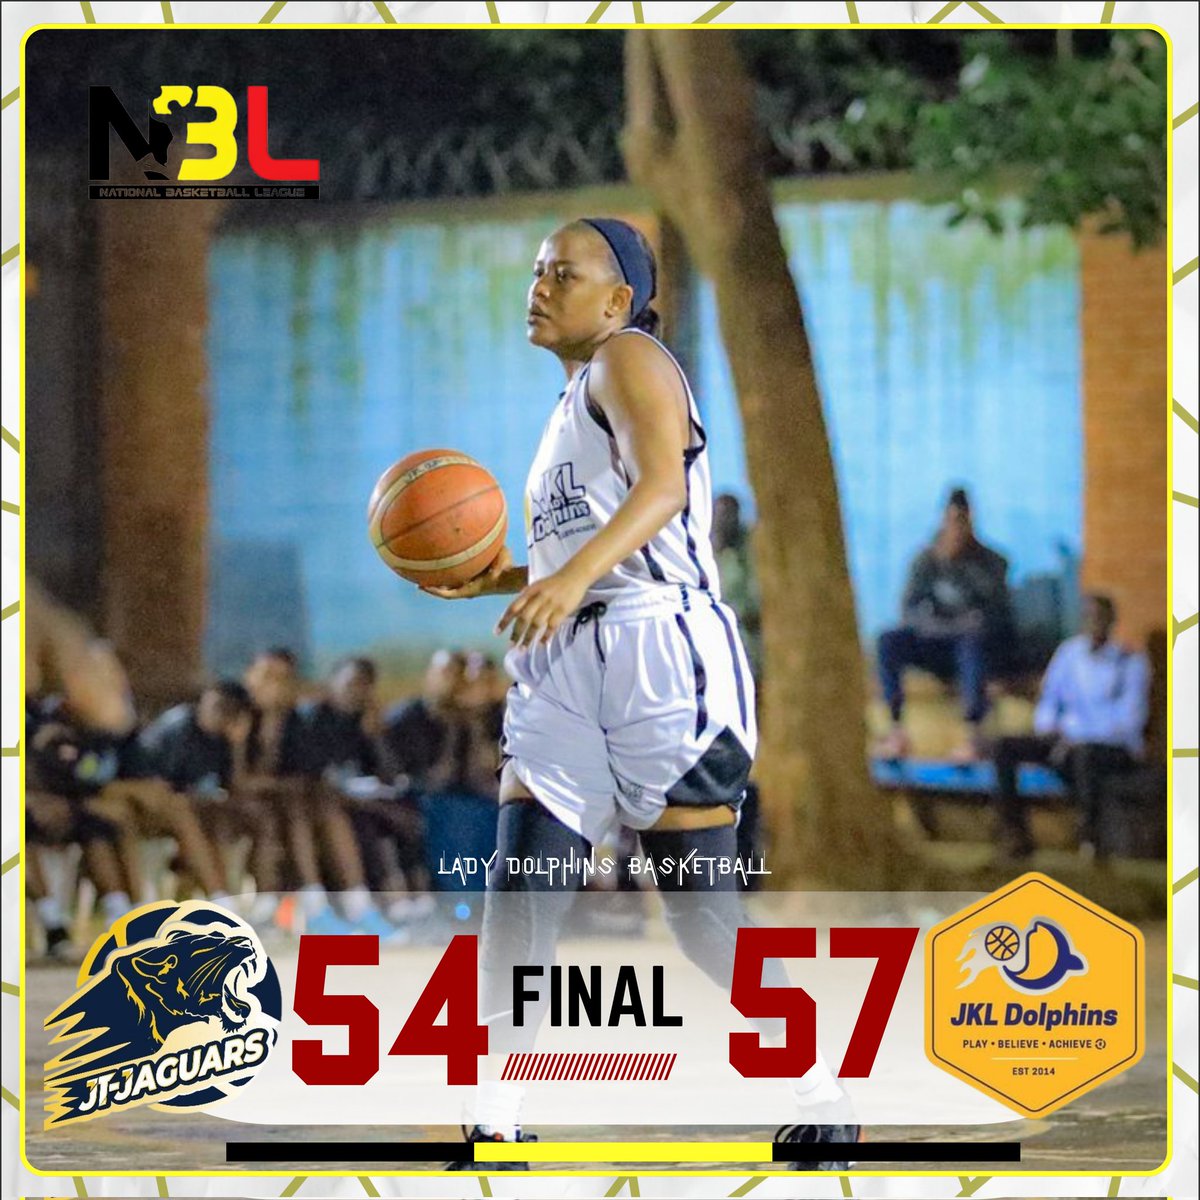 CLOSED OUT THE JAGUARINES! 🌊 #wnbl24 #ThisIsTheWay 🐬